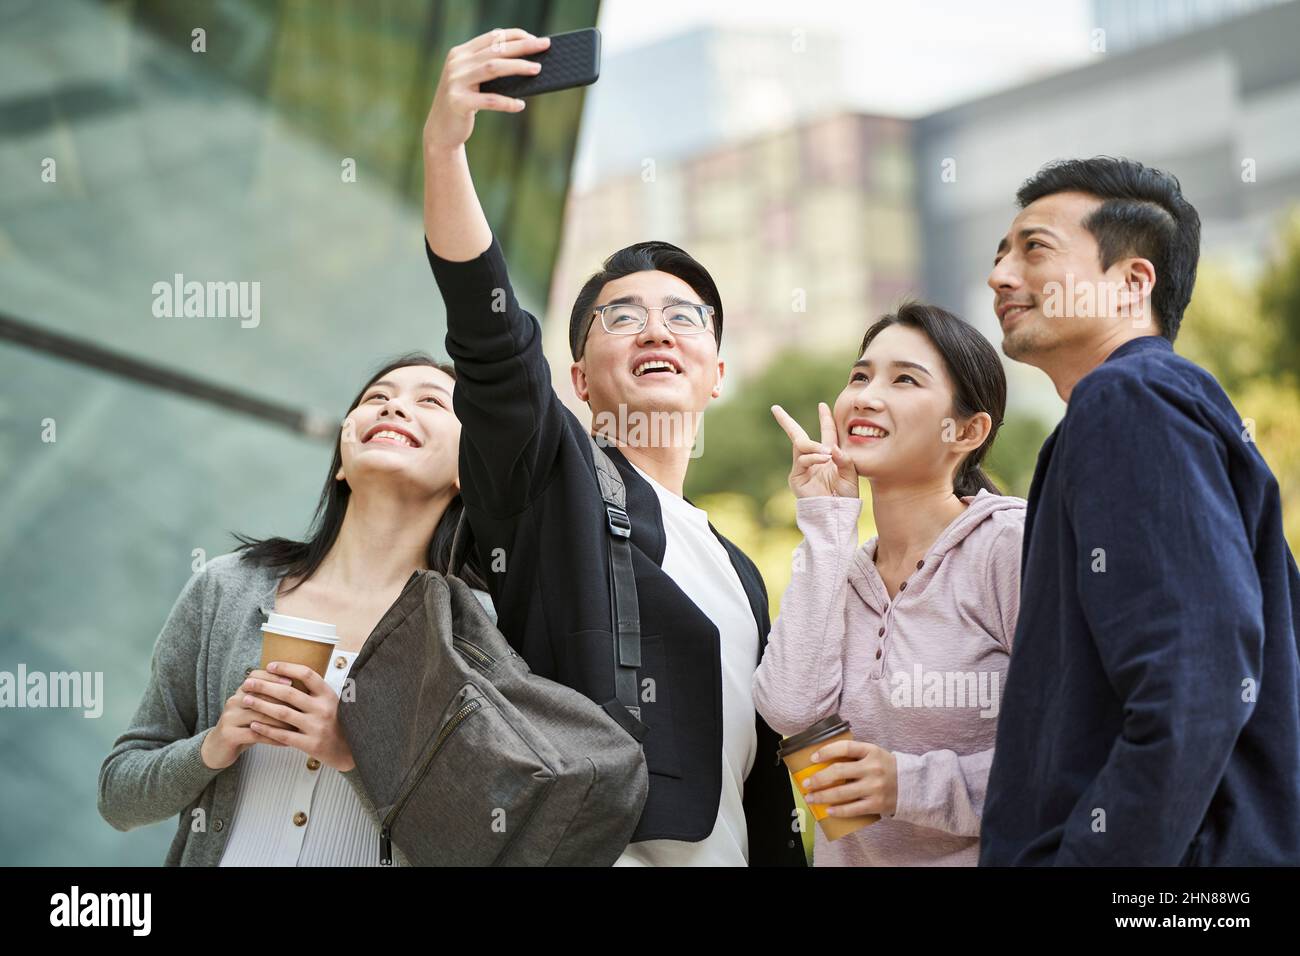 group of young asian people taking a selfie using cellphone outdoors on street happy and smiling Stock Photo